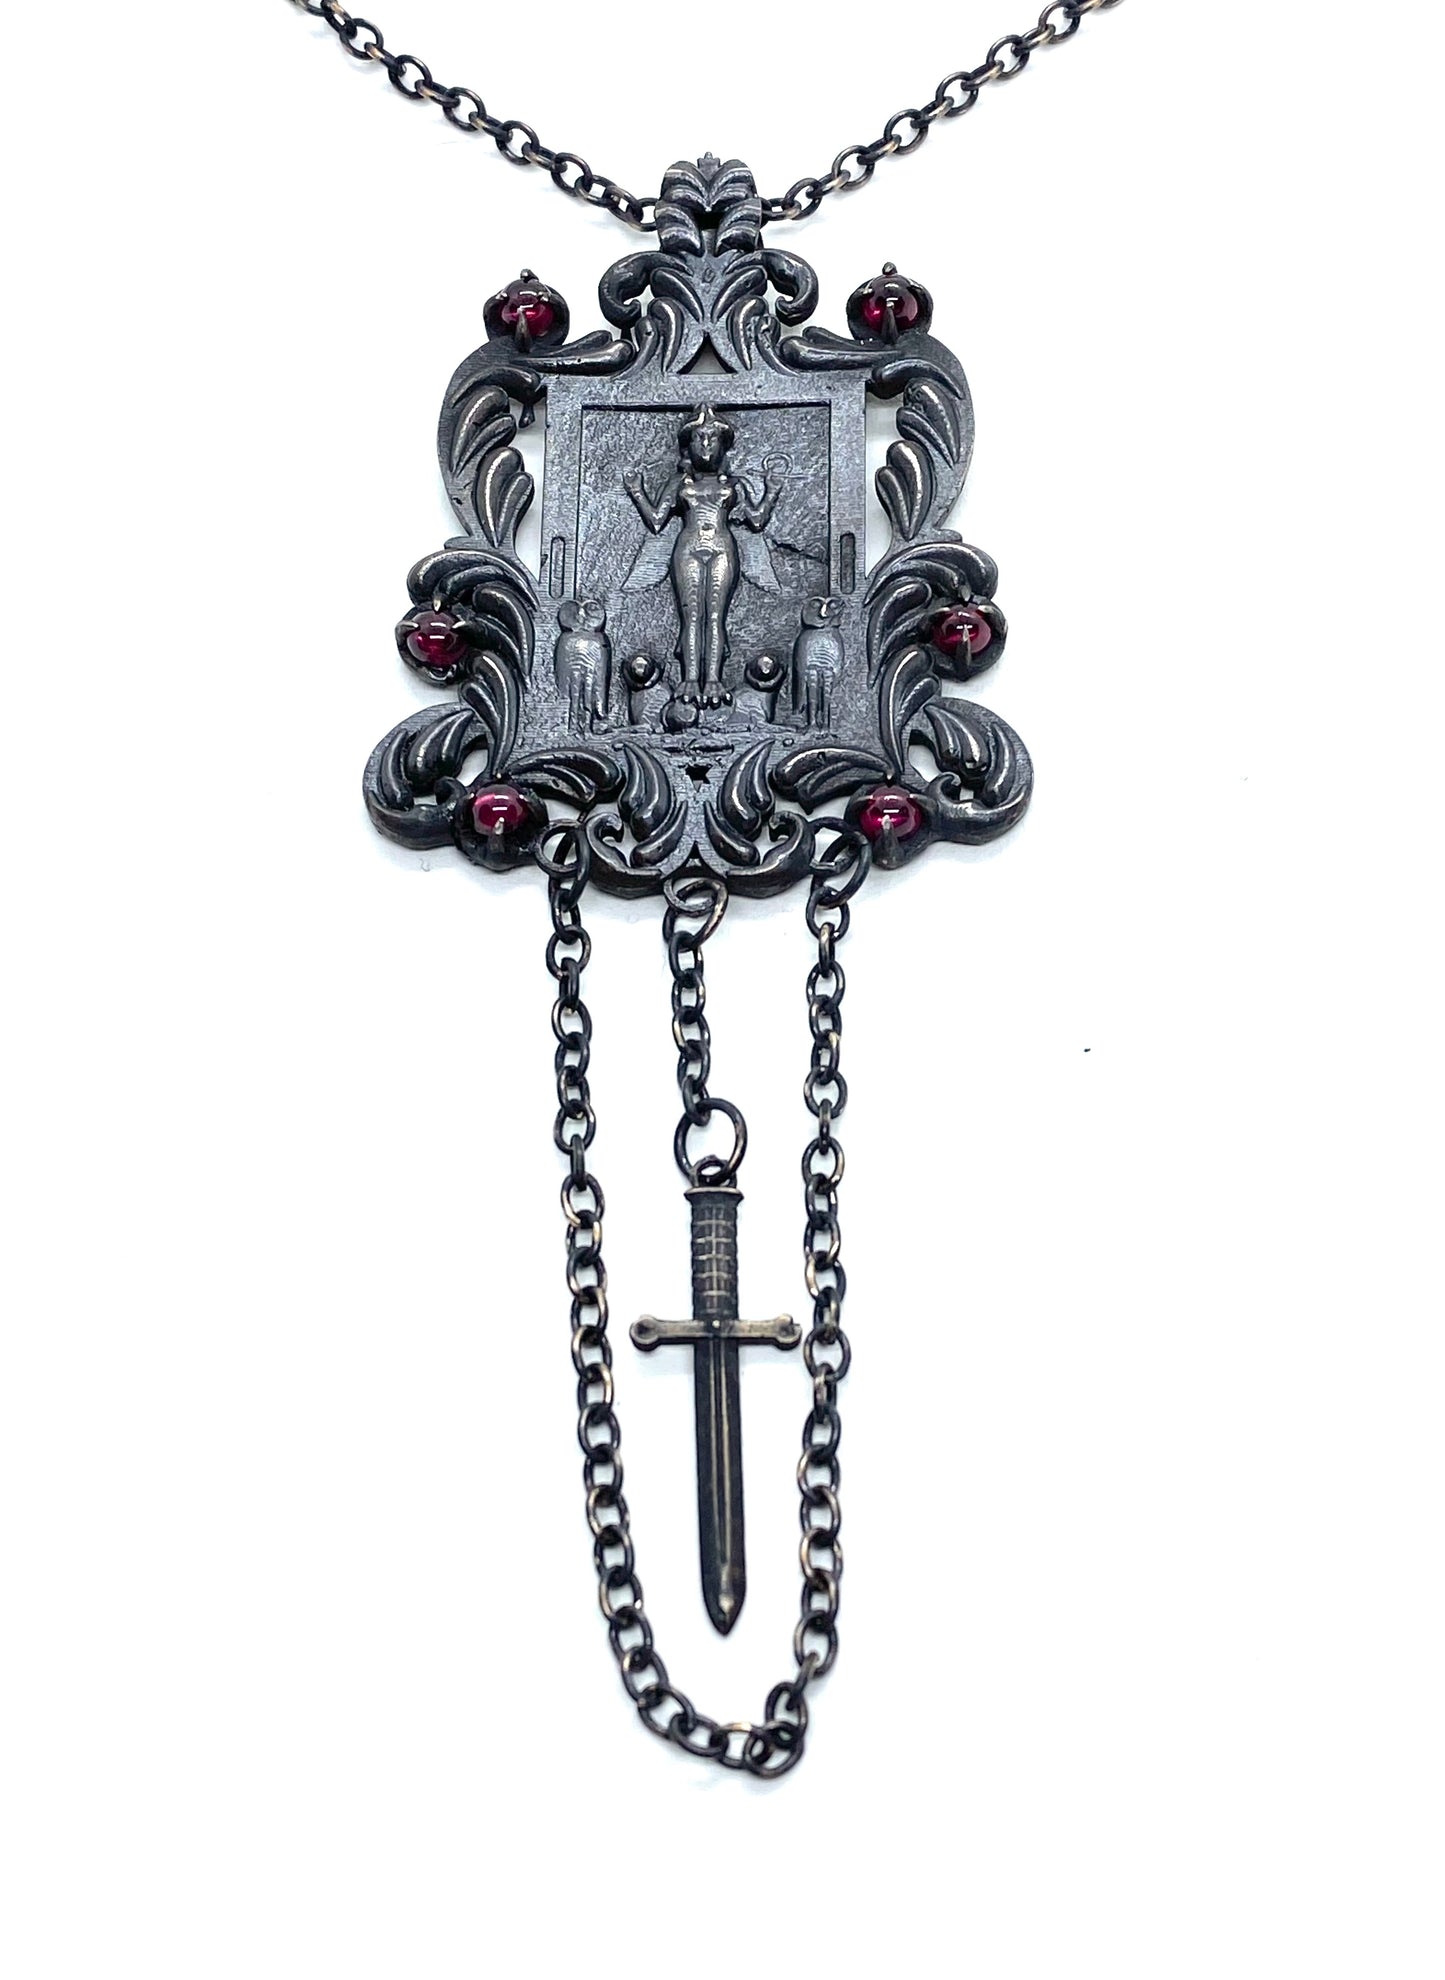 Lilith Shrine Necklace in Bronze and Garnet